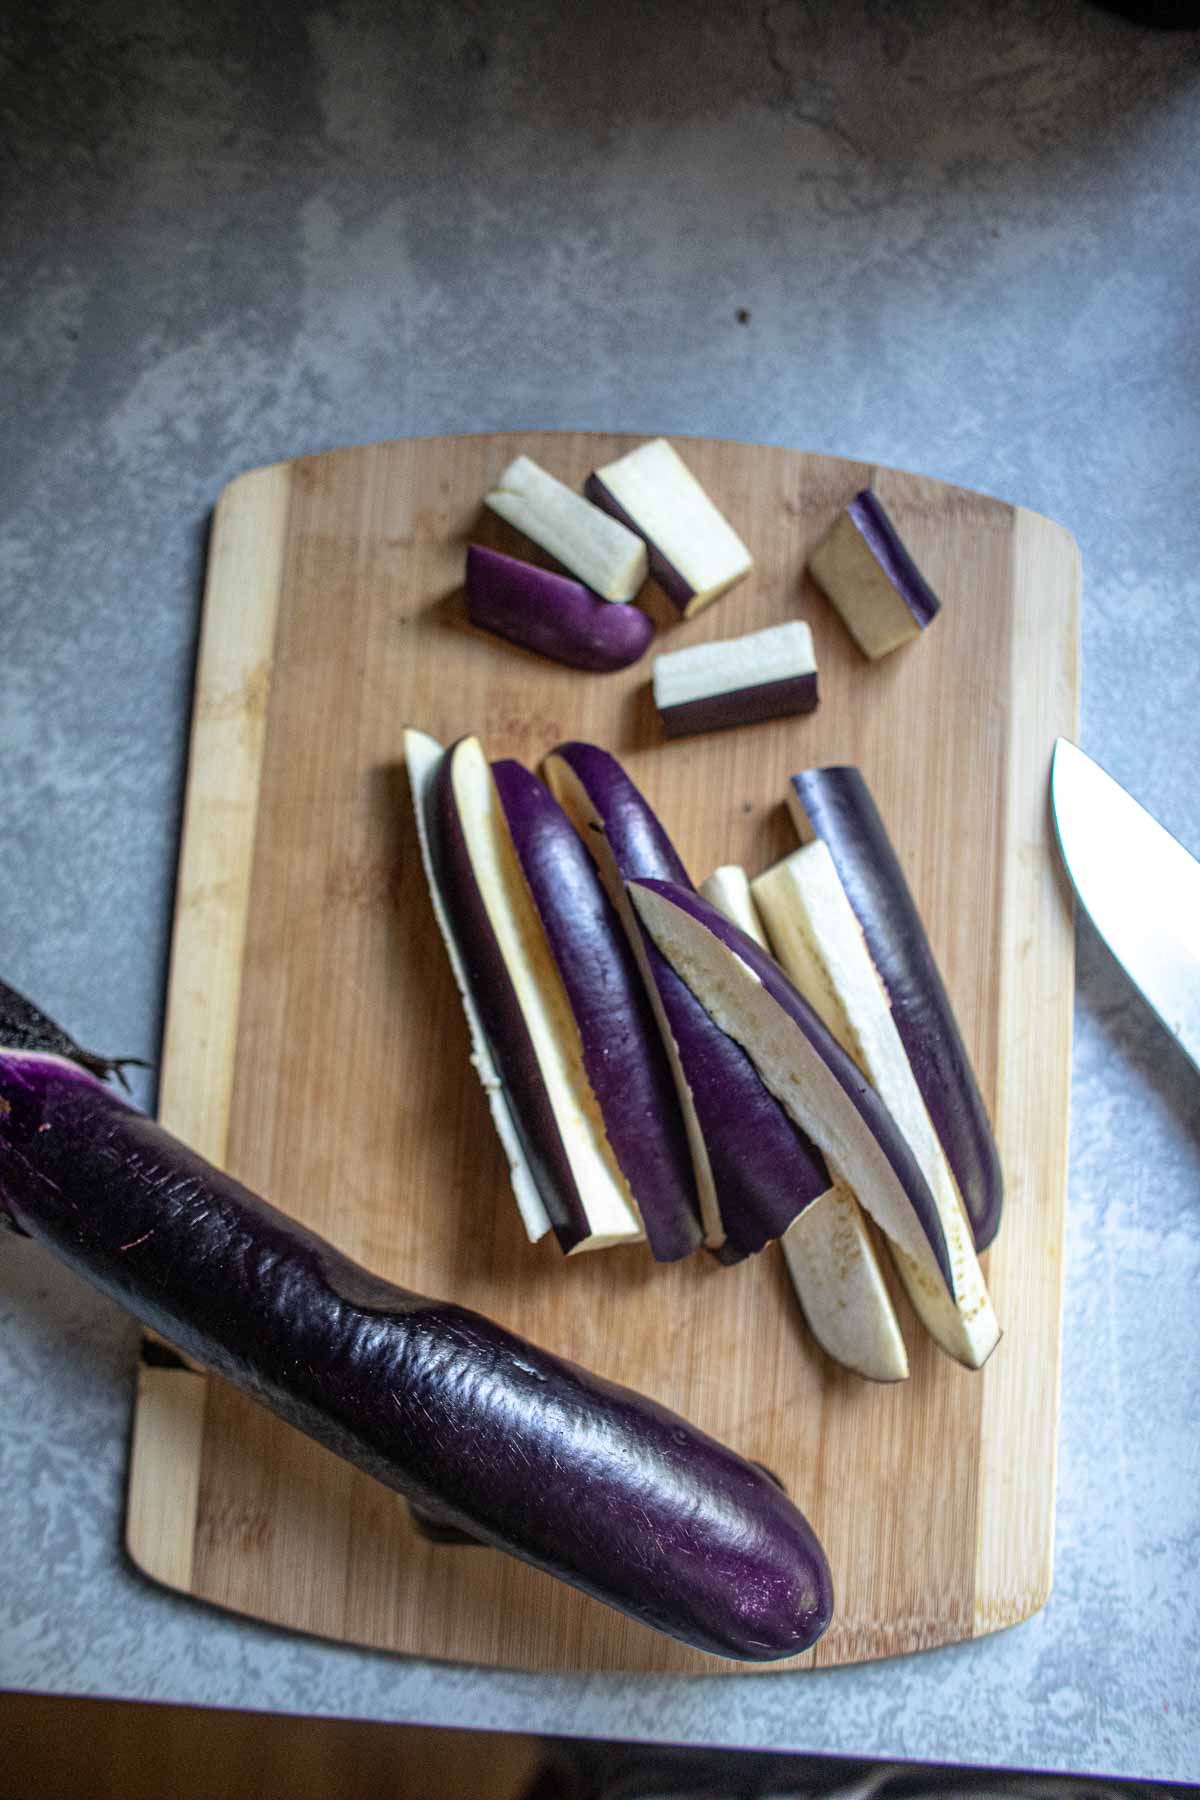 Chinese eggplant chopped into long and small pieces